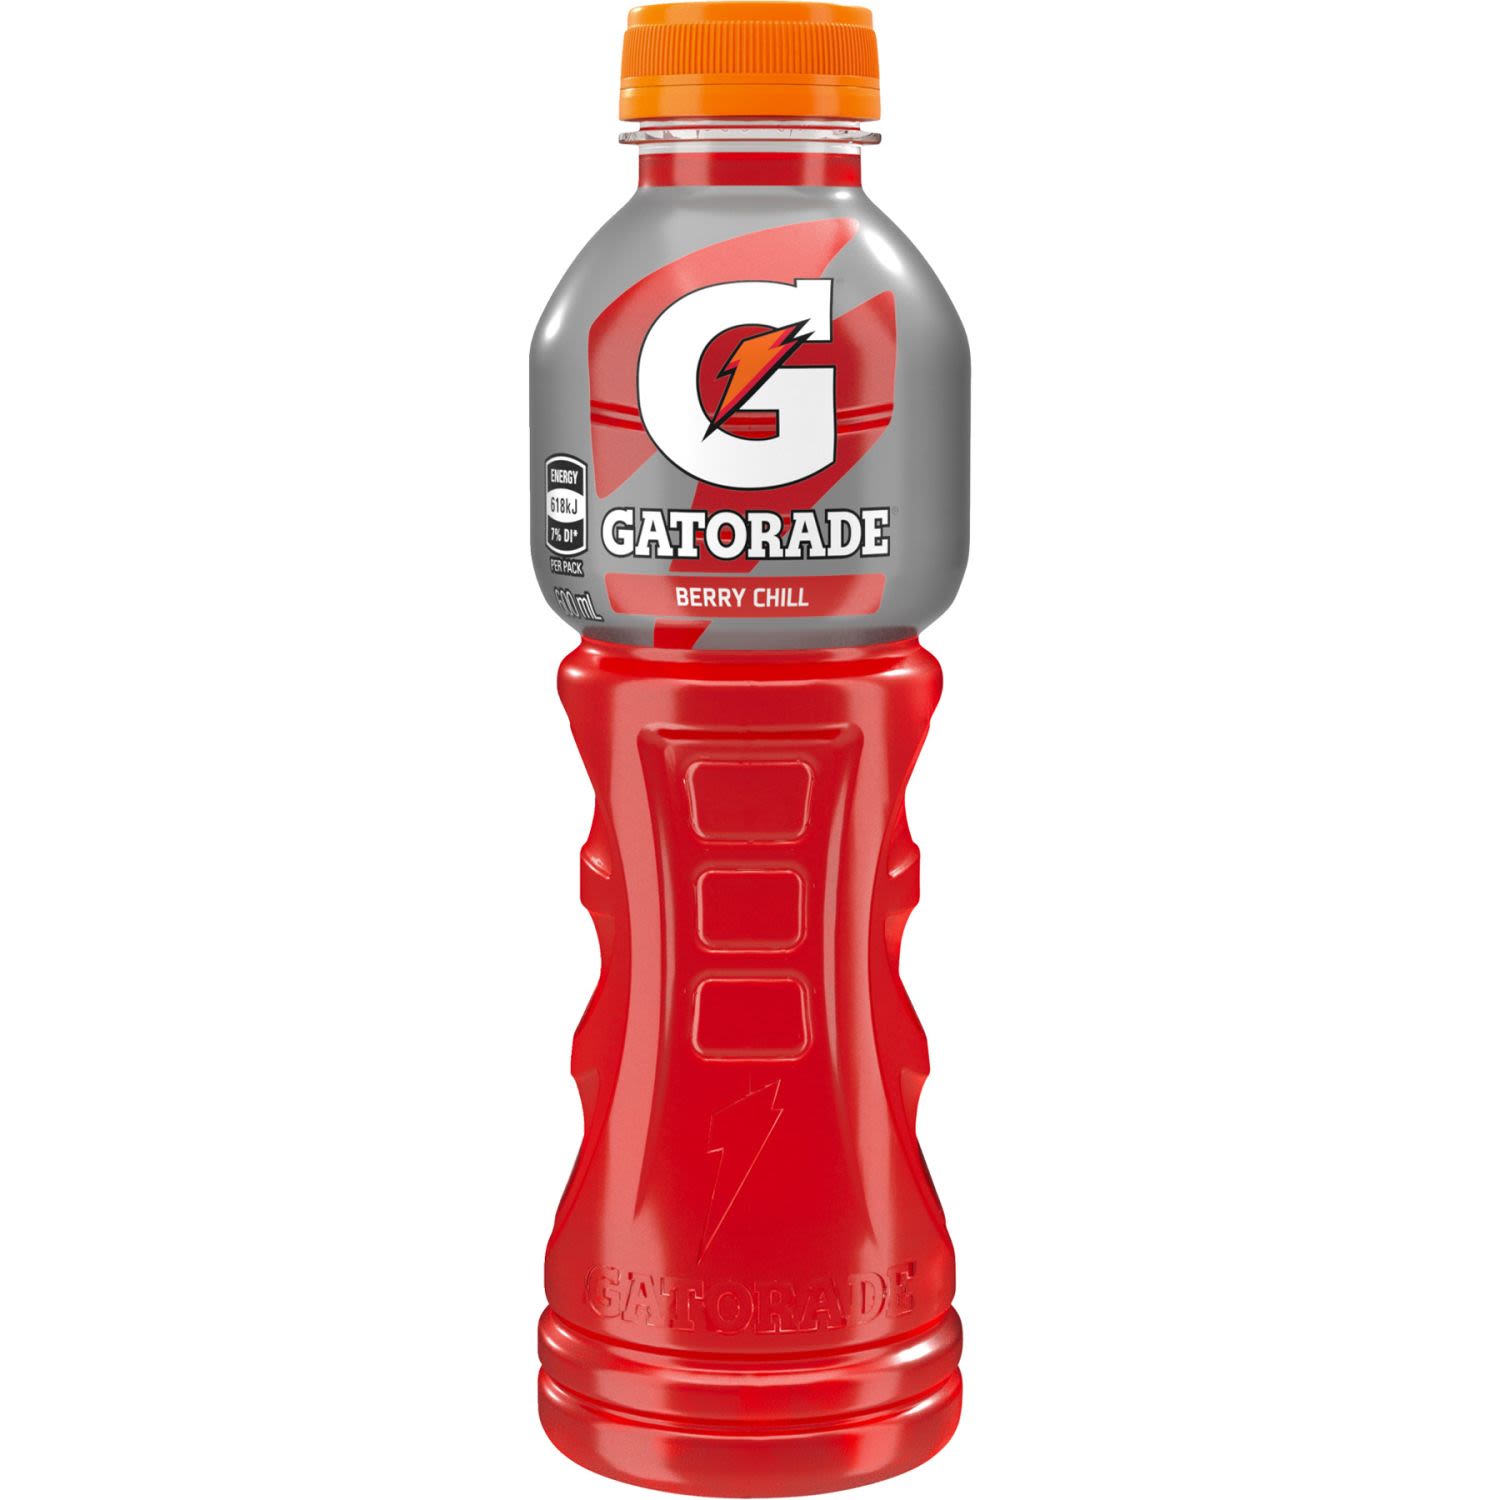 Gatorade Berry Chill electrolyte sports drink contains critical electrolytes to help replace what’s lost in sweat and fuel you to perform at your best.

You lose a whole lot more than water when you sweat. Losses in fluids and electrolytes can negatively impact performance. During training and exercise, you burn off vital energy needed to continue competing with the best.

Gatorade is the Number 1 sports rehydration drink on the planet scientifically formulated to help refuel with carbs to support the demands you put on your body, which is why it's trusted by some of the world's best athletes.

Gatorade Berry Chill is also available in a larger 1L sports drink bottle to help replenish and hydrate your body during more intense and prolonged exercise.

NOTHING BEATS GATORADE.<br /> <br />